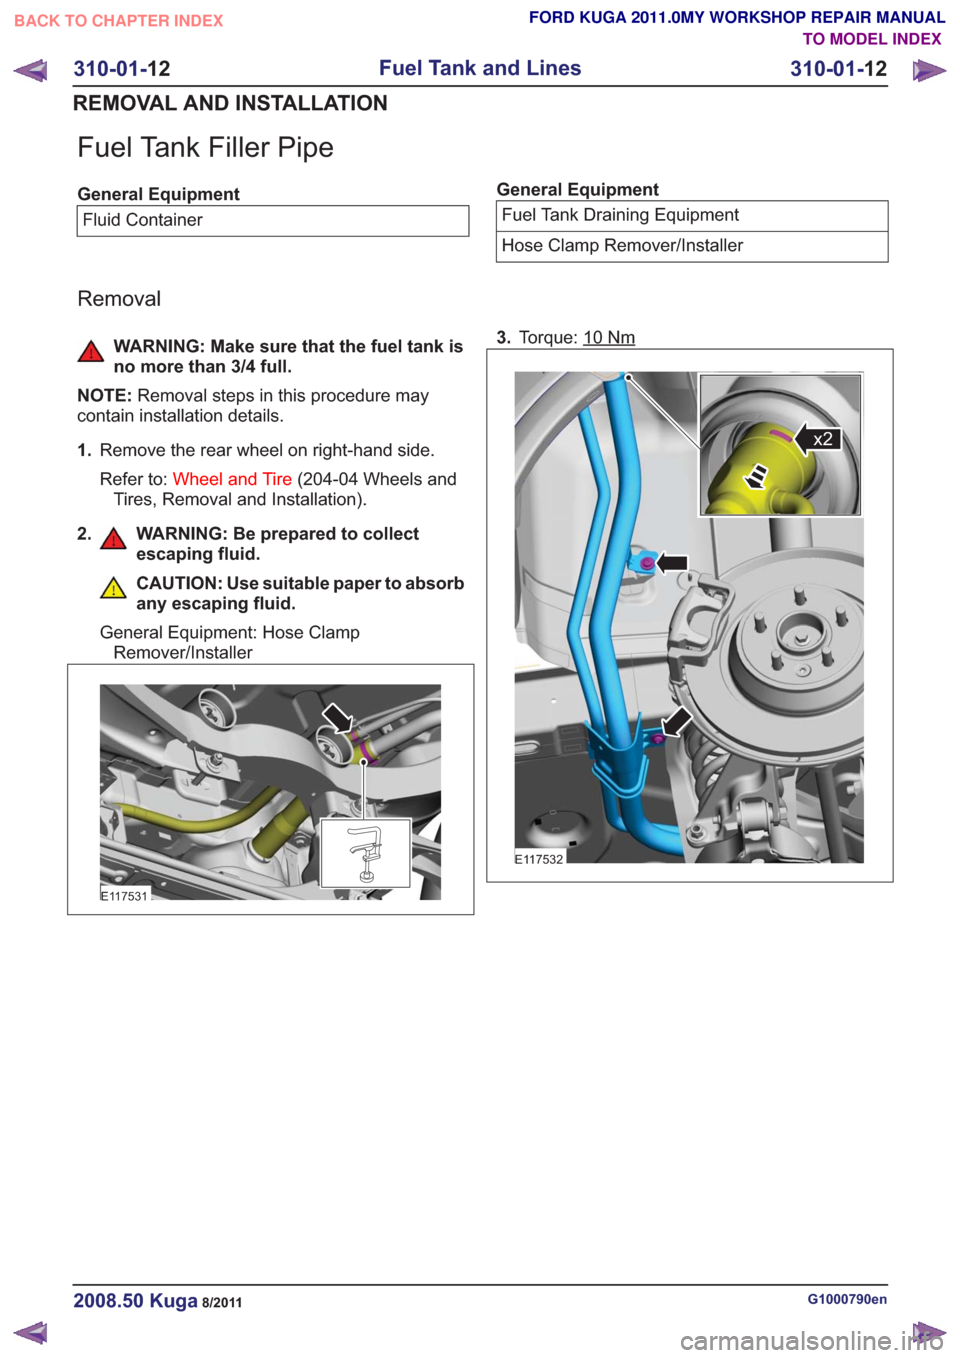 FORD KUGA 2011 1.G Manual PDF Fuel Tank Filler Pipe
General EquipmentFluid ContainerGeneral EquipmentFuel Tank Draining Equipment
Hose Clamp Remover/Installer
Removal
WARNING: Make sure that the fuel tank is
no more than 3/4 full.